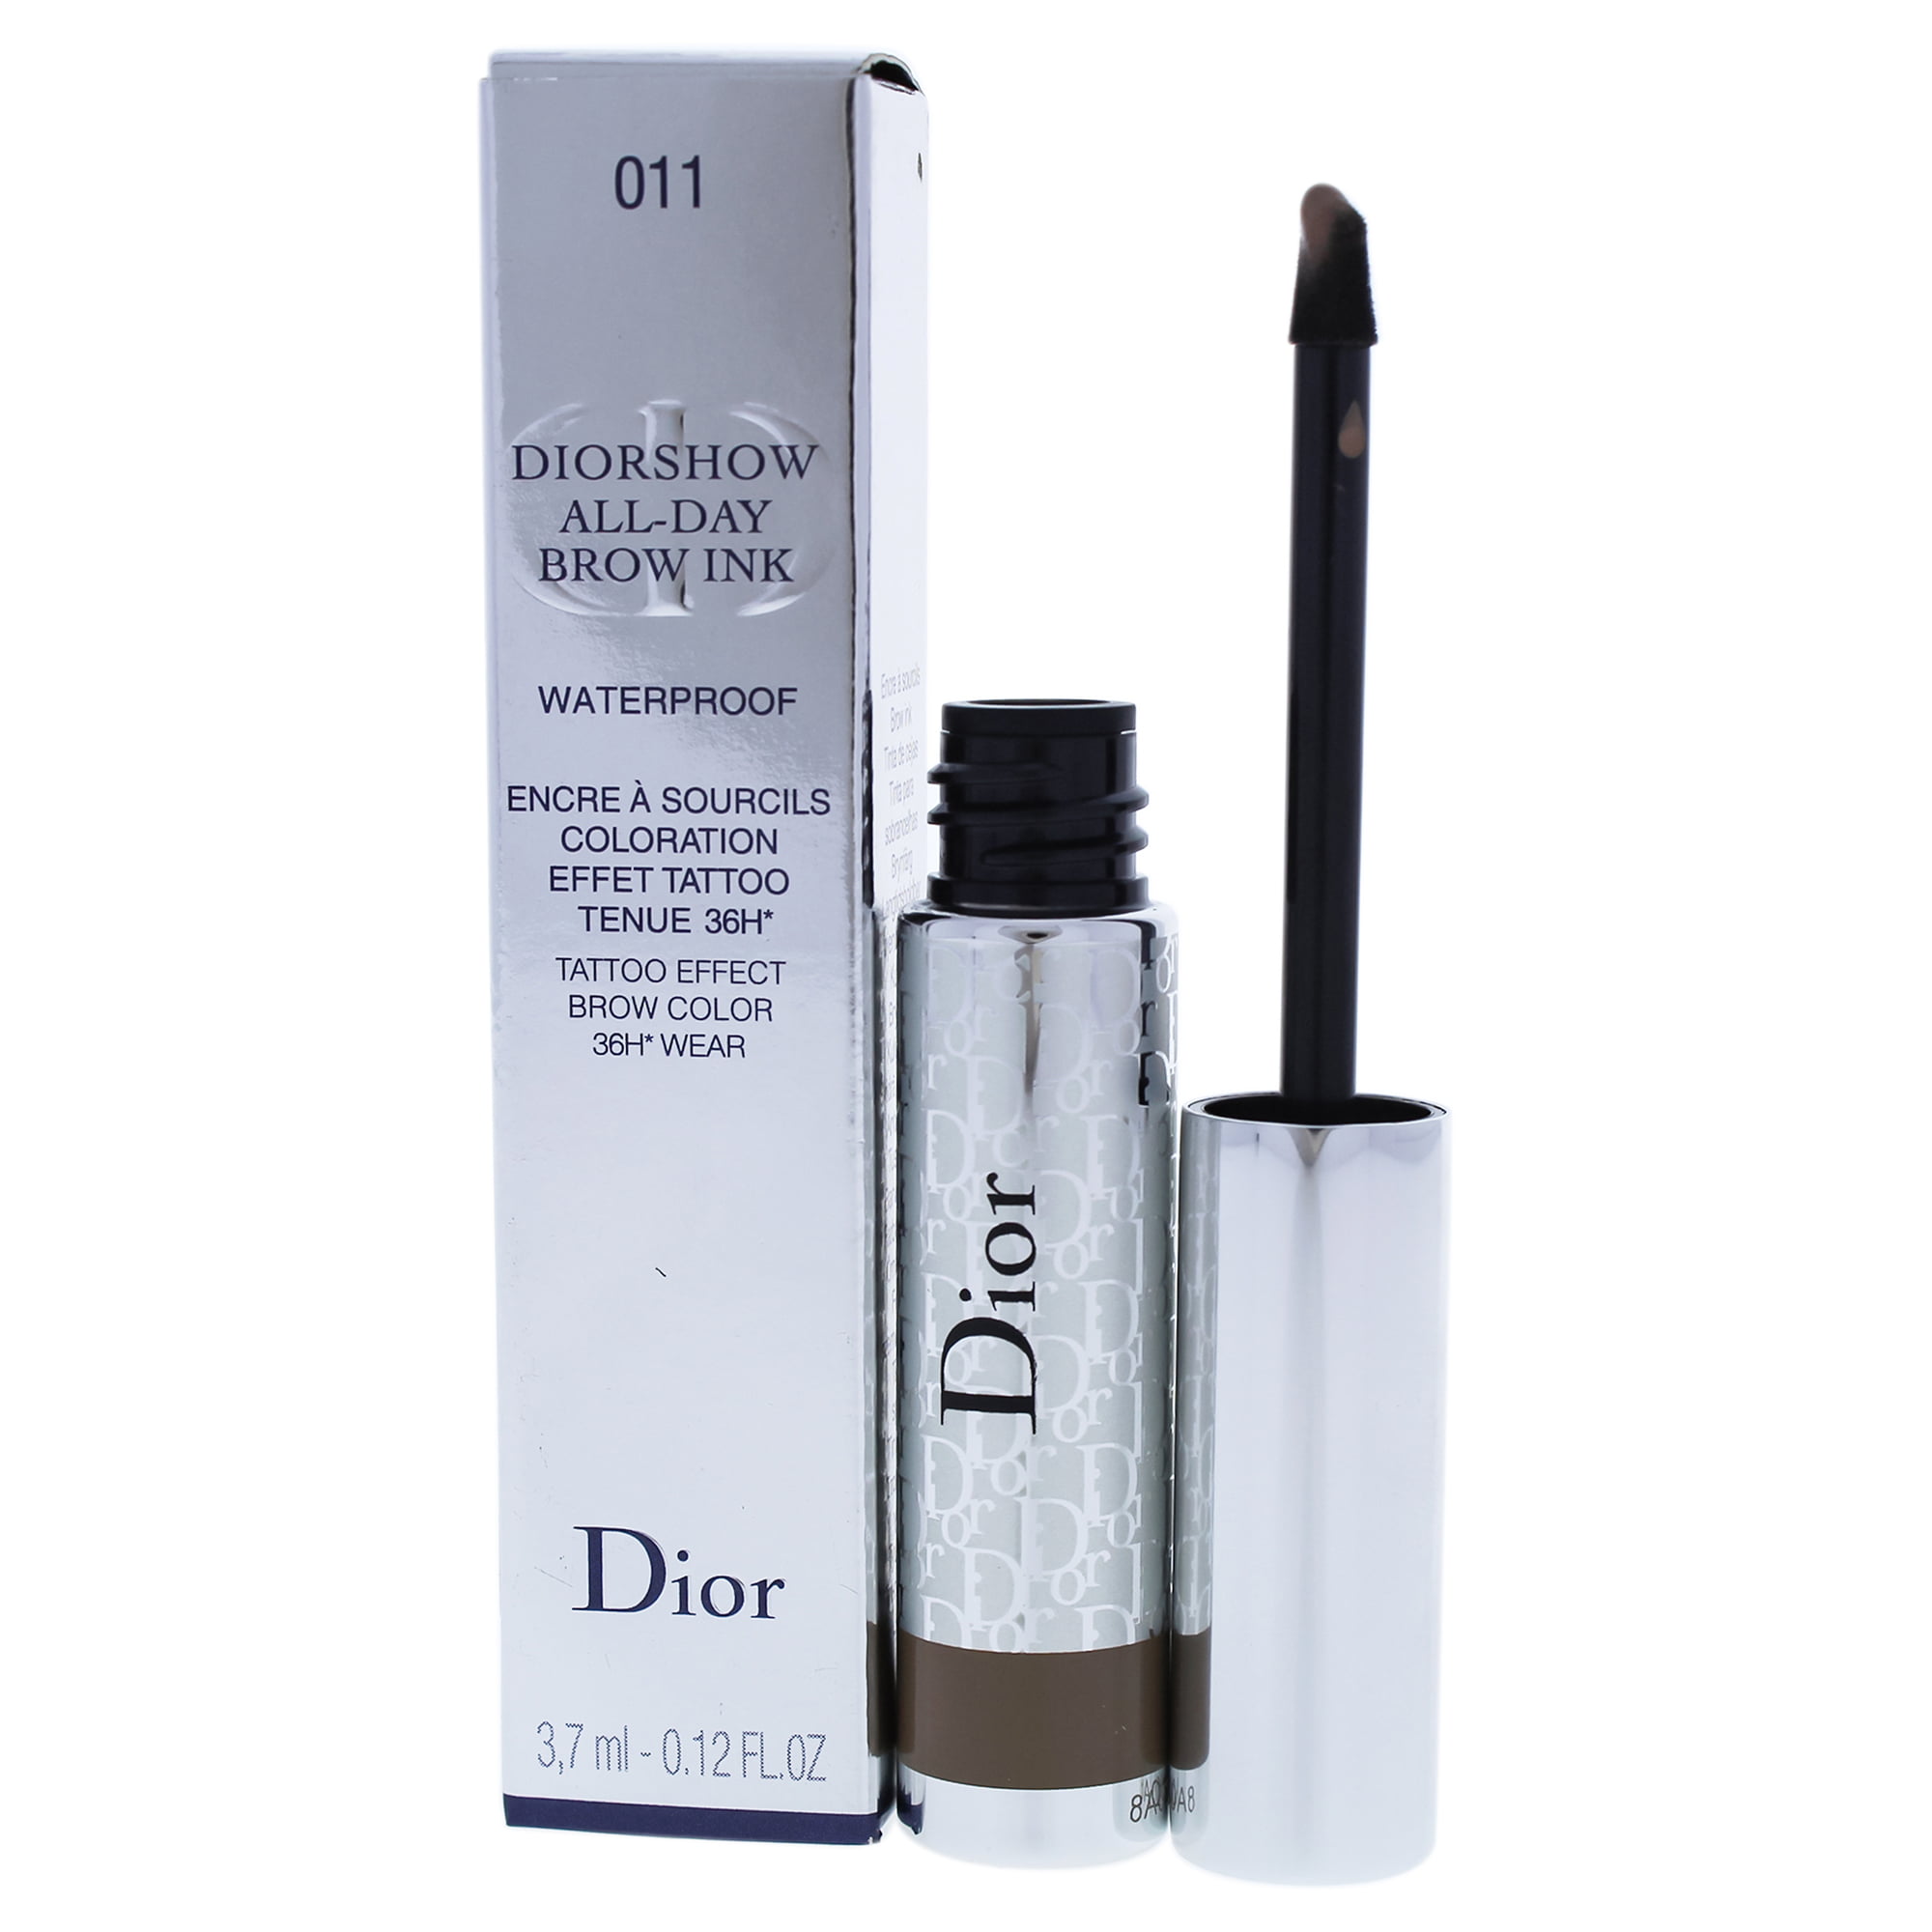 diorshow all day brow ink